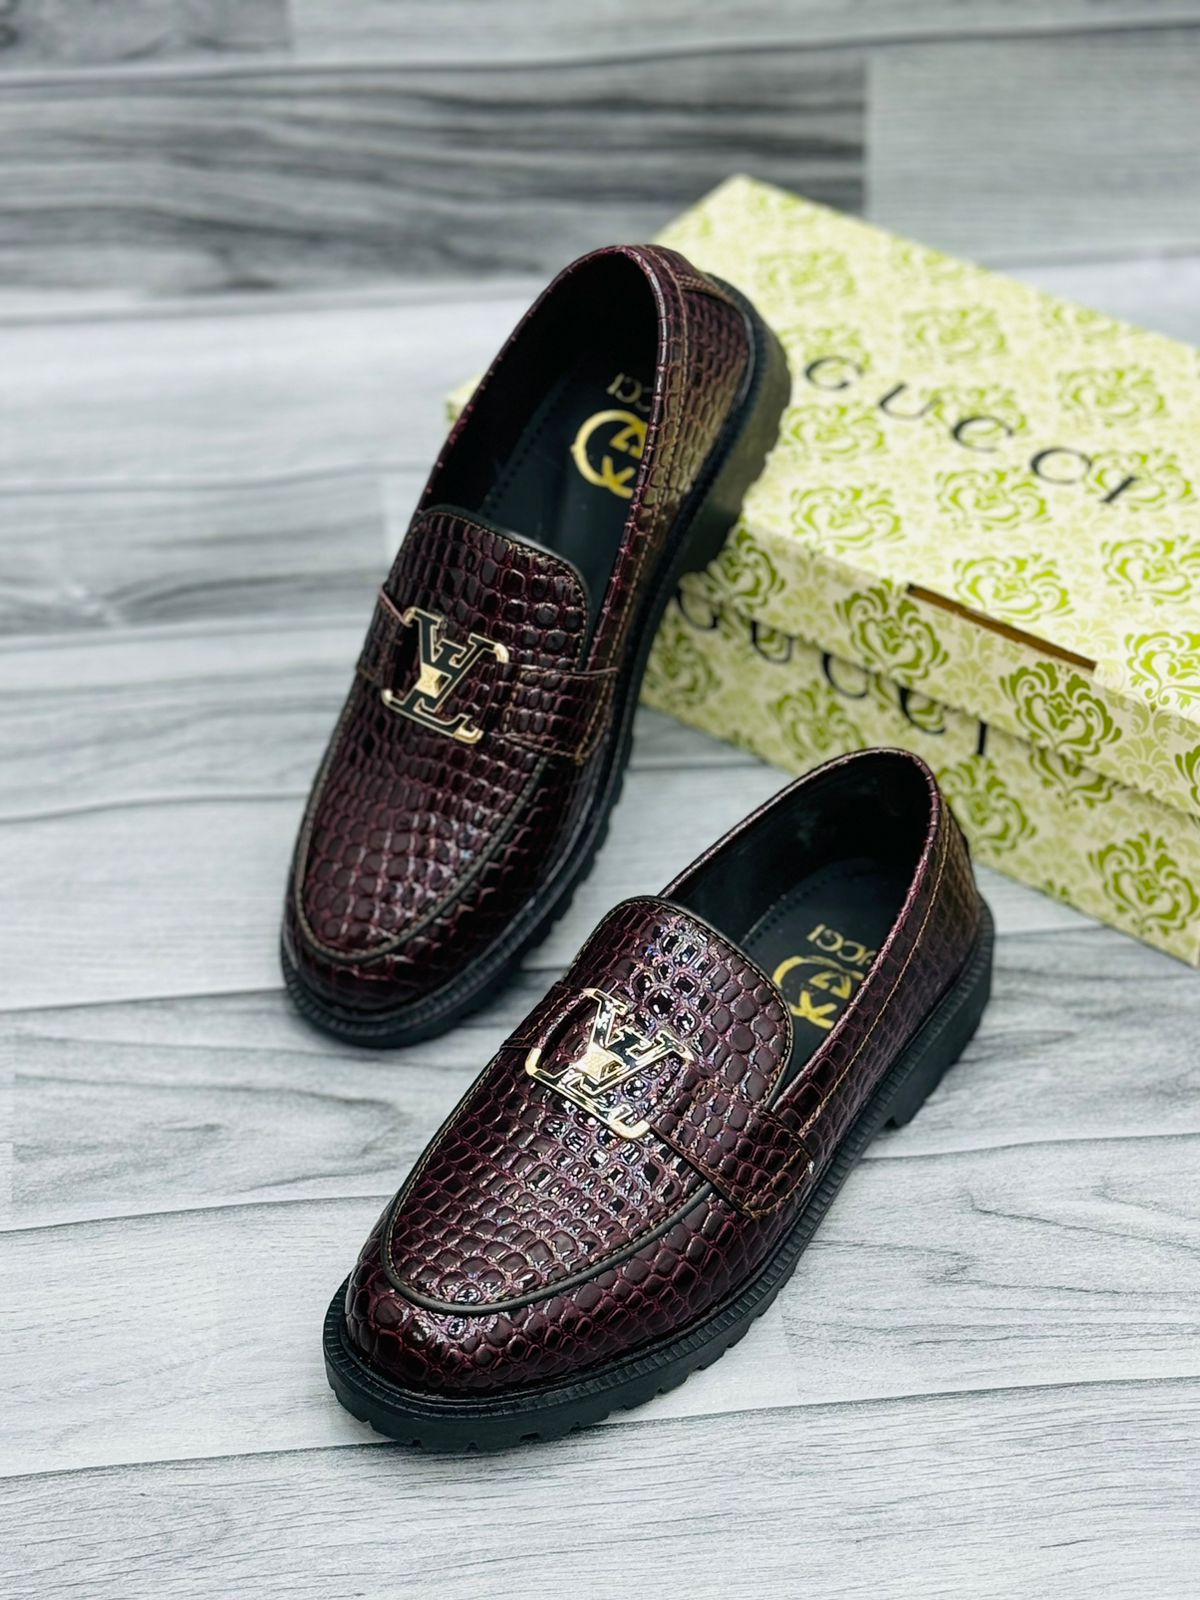 New Gucci Brown Formal Shoes In Pakistan